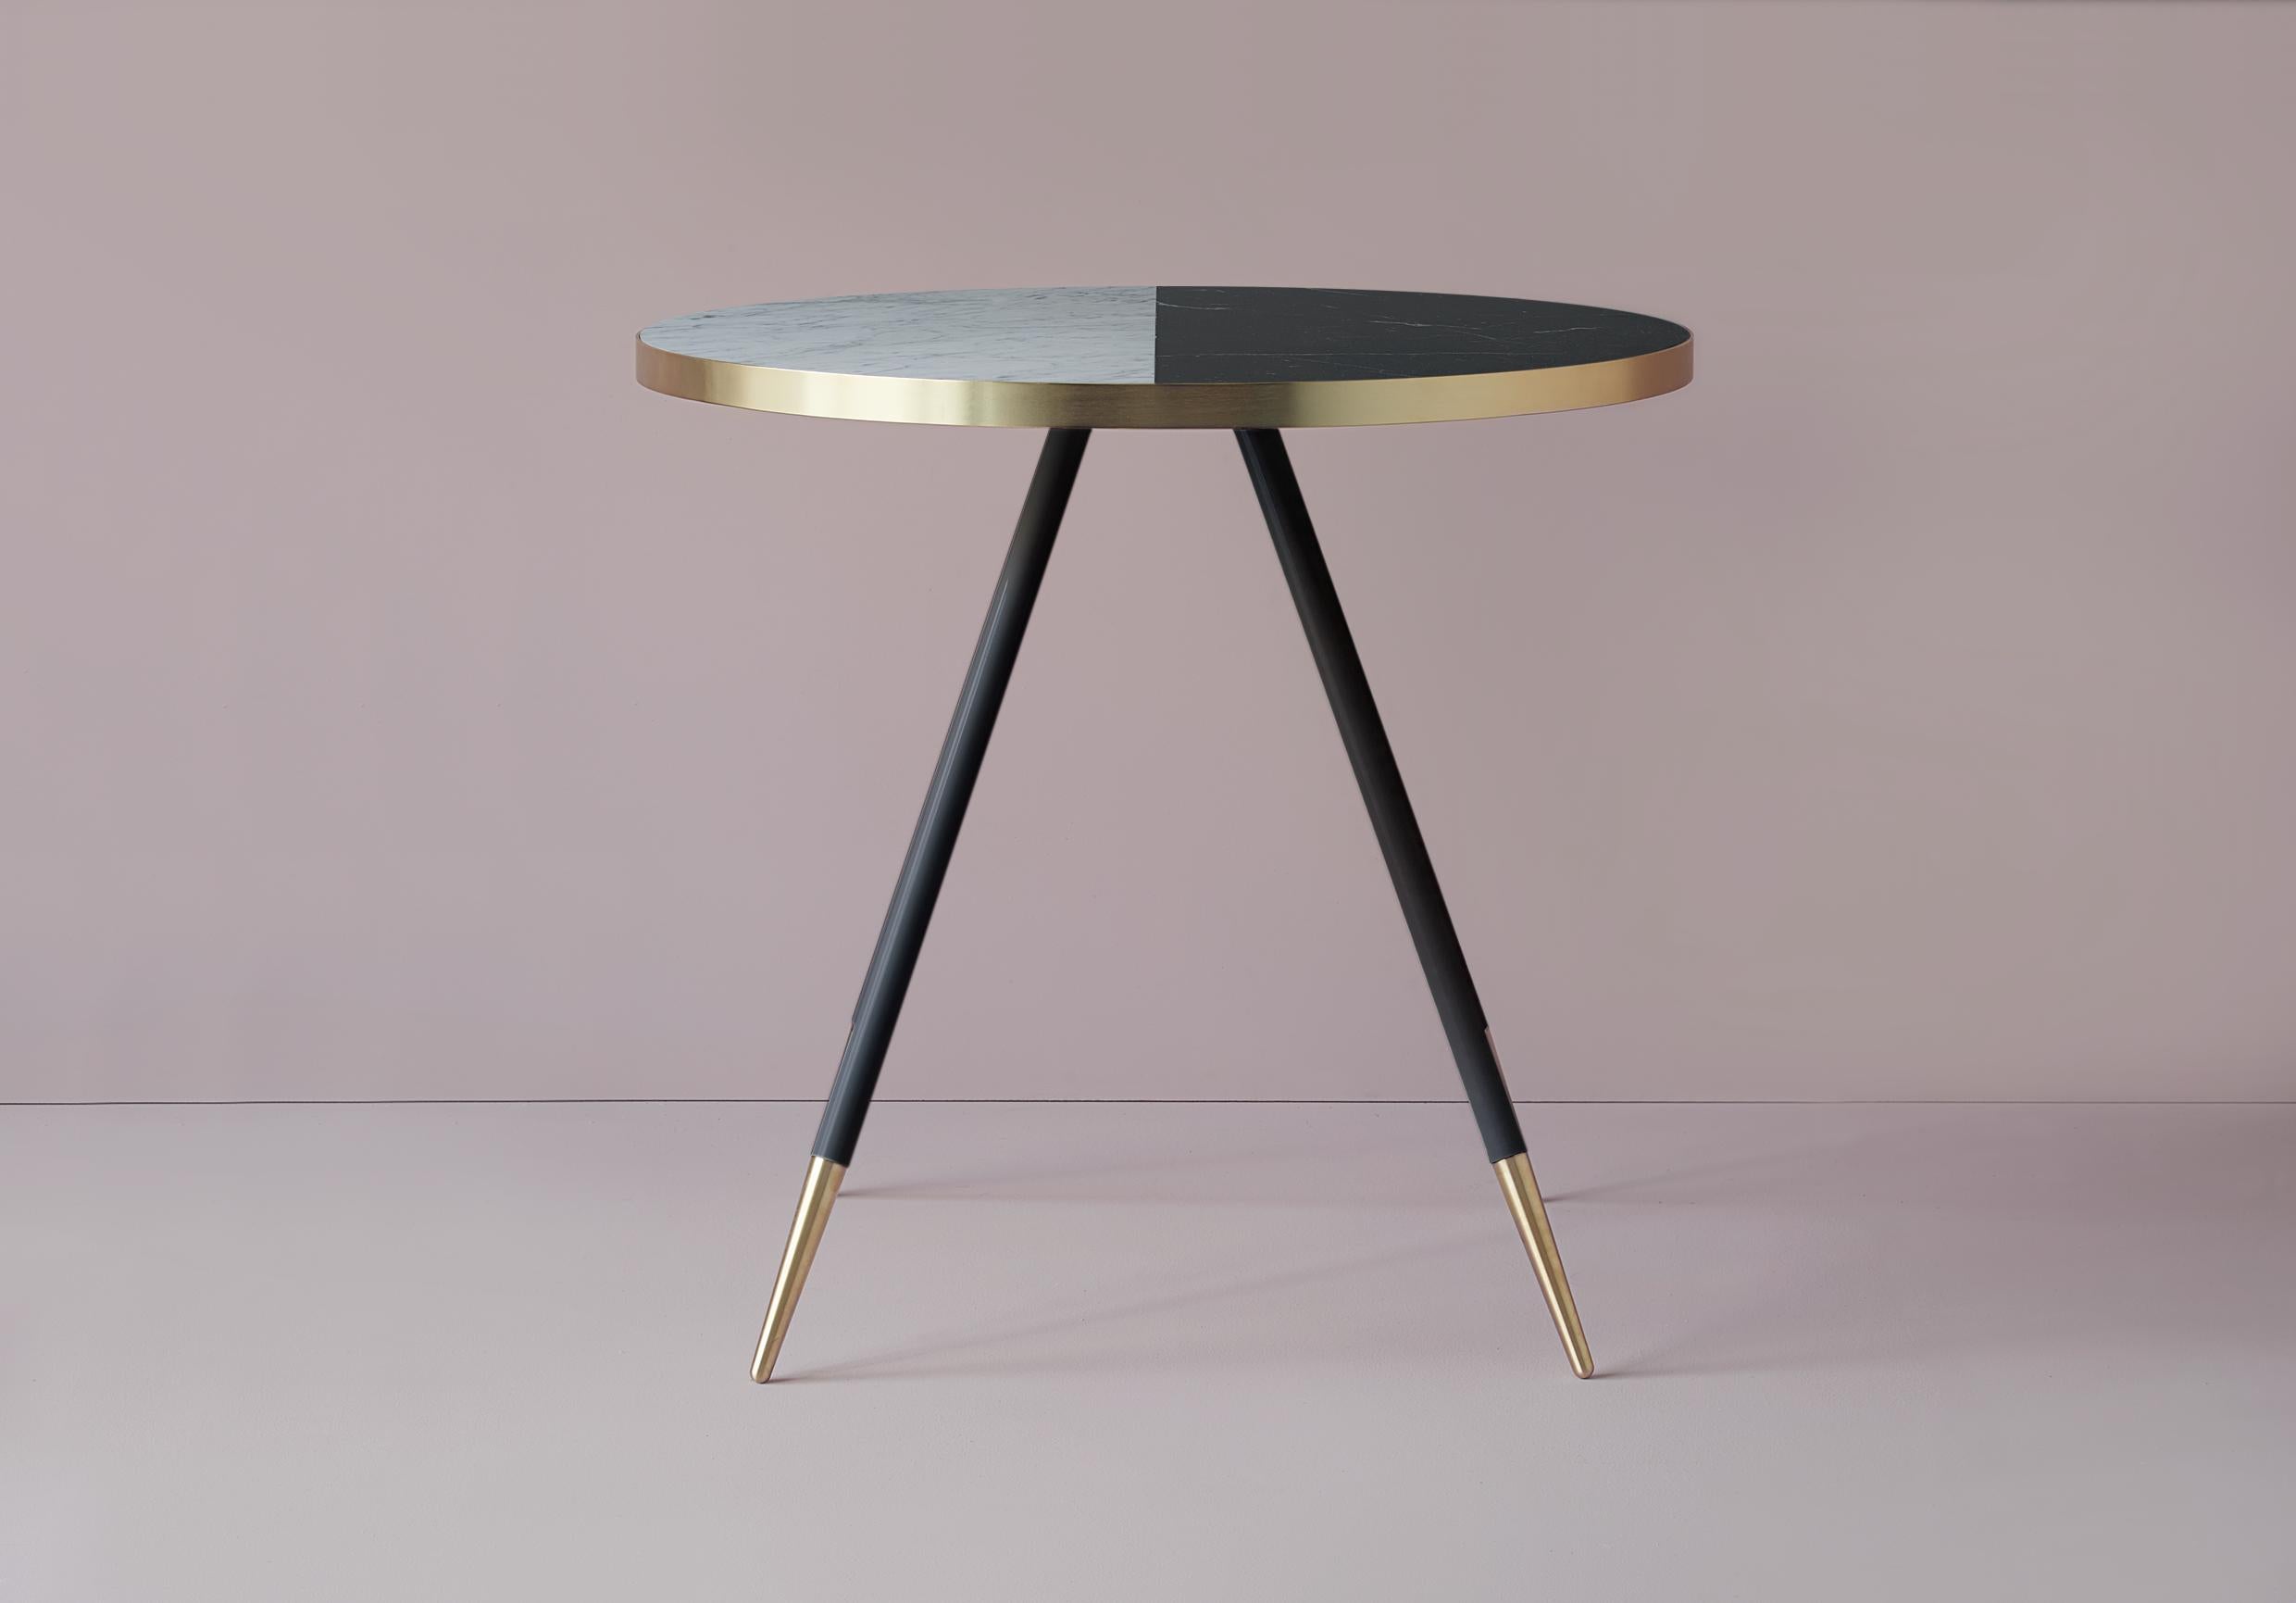 Bethan Gray has been inspired by pairing the natural beauty of colored marble together with warm brushed brass to
create her Band range of tables. For this range, solid marble is encased in a warm and elegant metallic rim to bring a
distinctive,